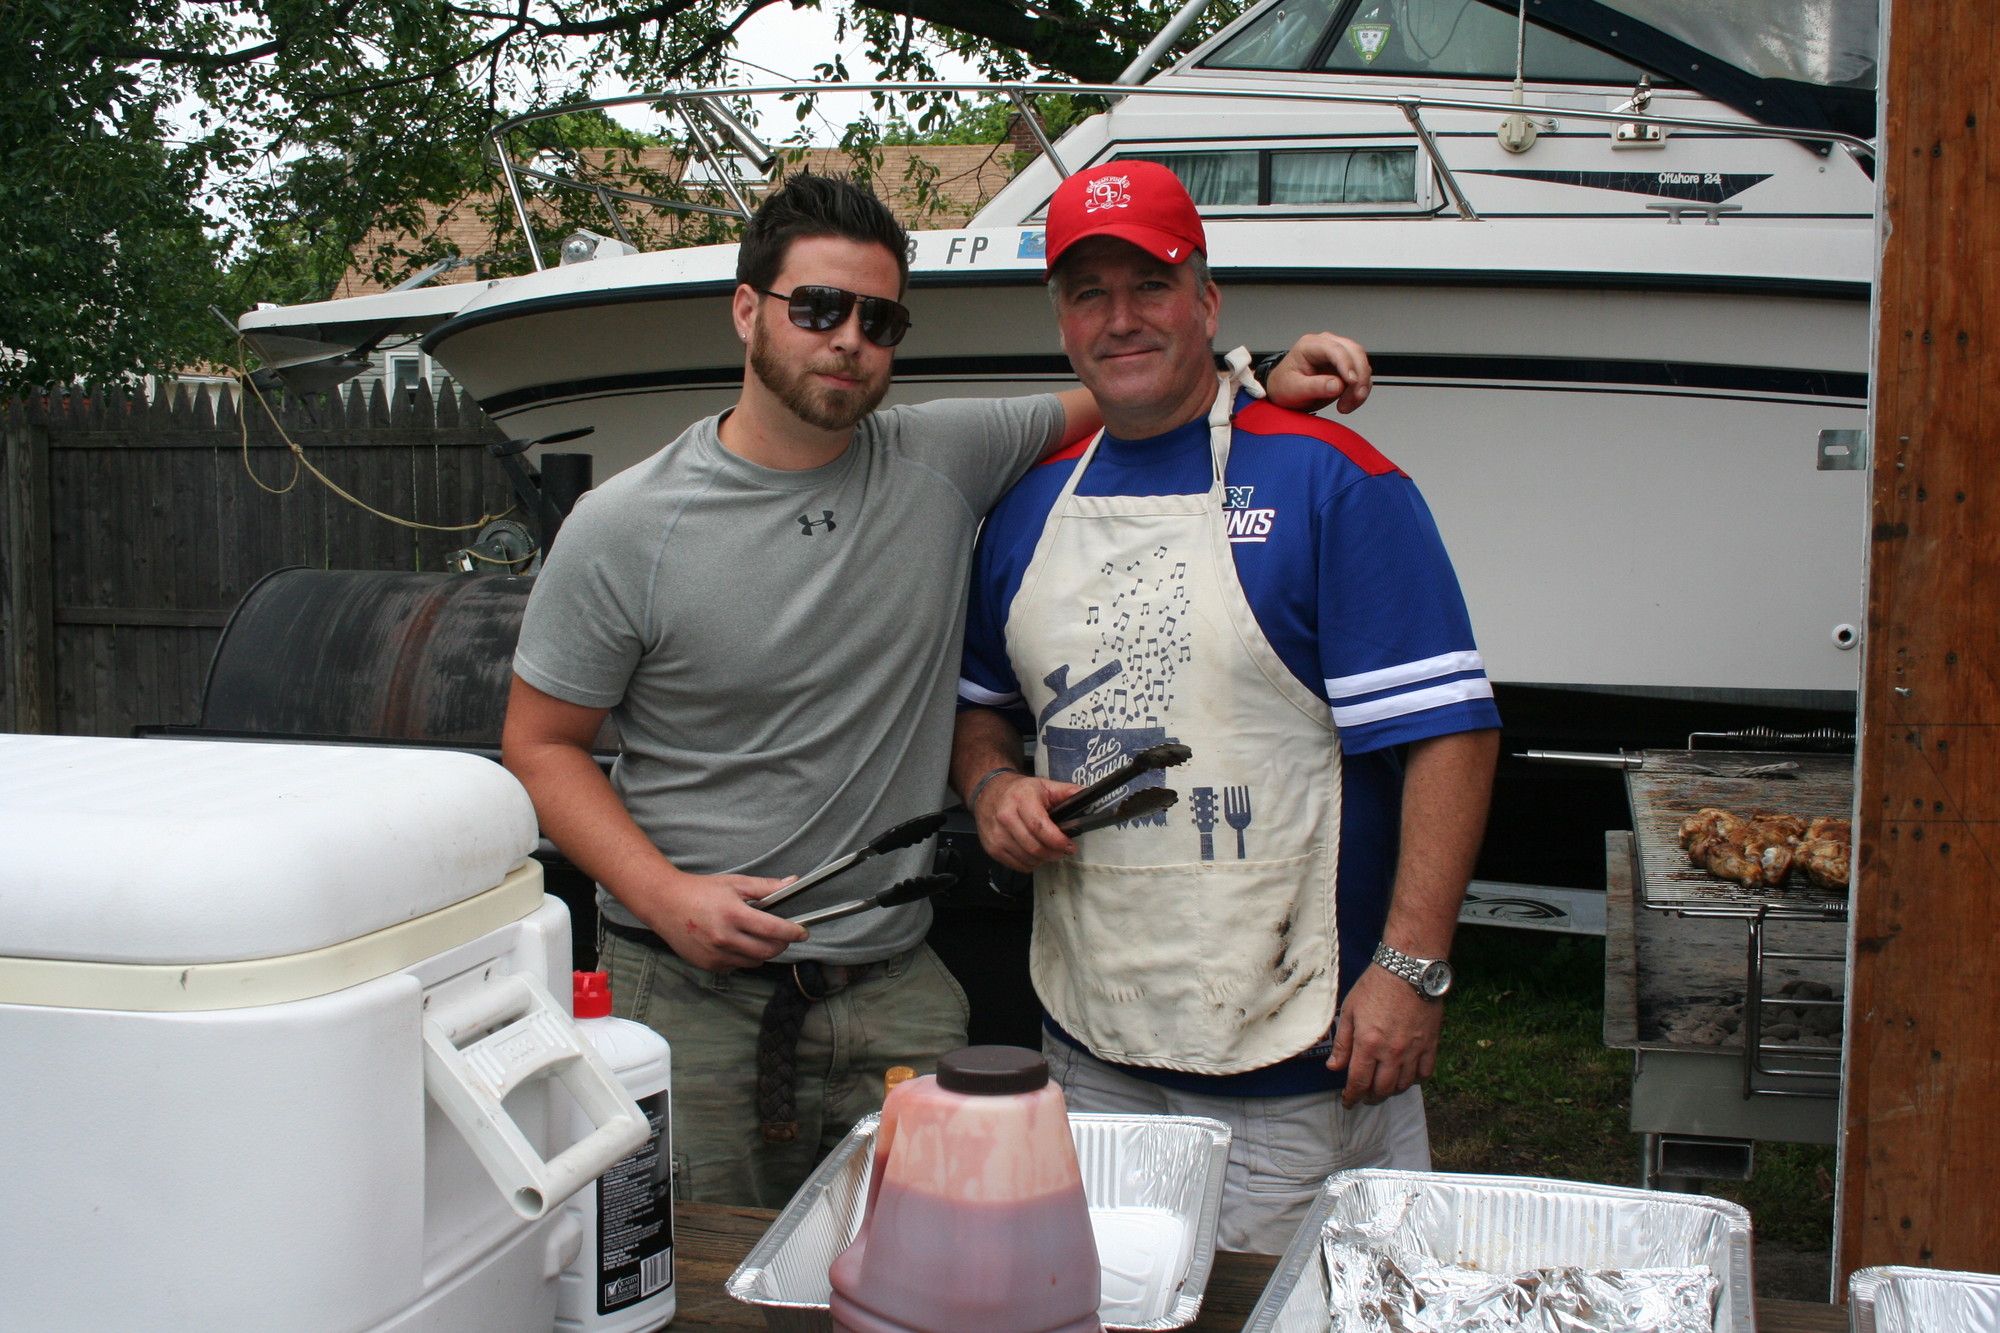 Freddy Berotti Jr. and Owen McHenry fired up some burgers and hot dogs for the barbecue.